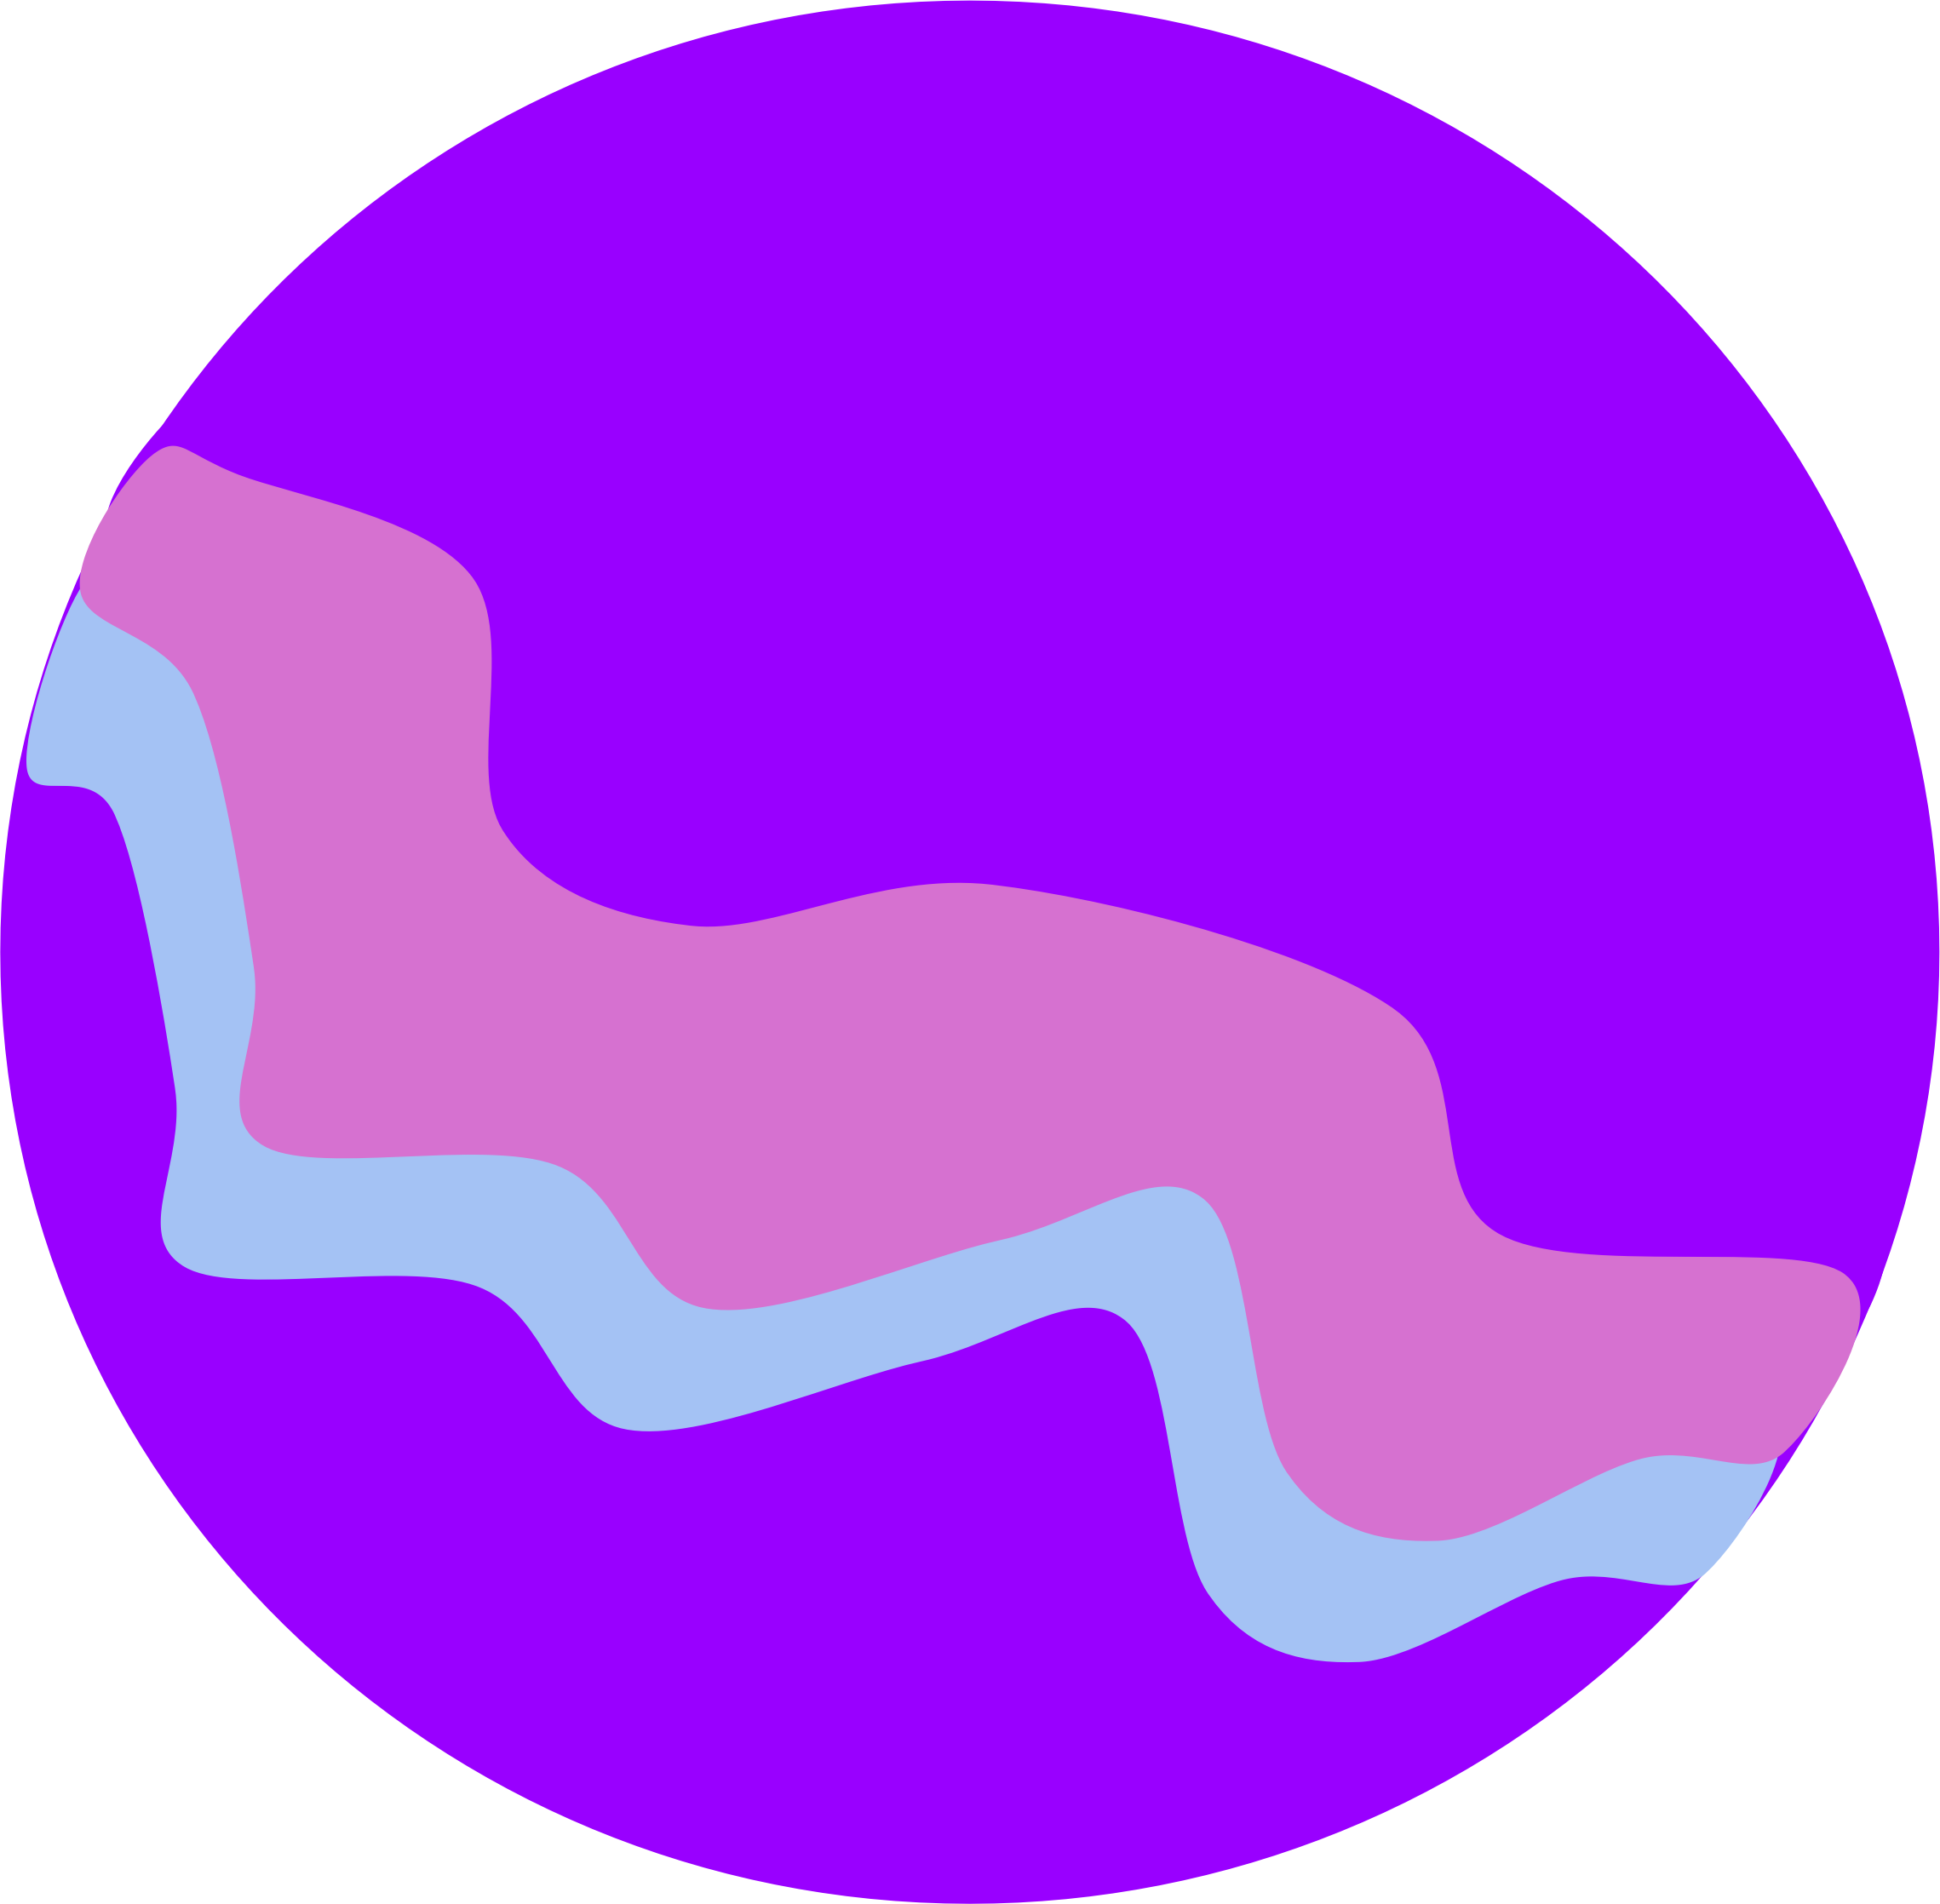 Abstract Purple Planet Illustration PNG